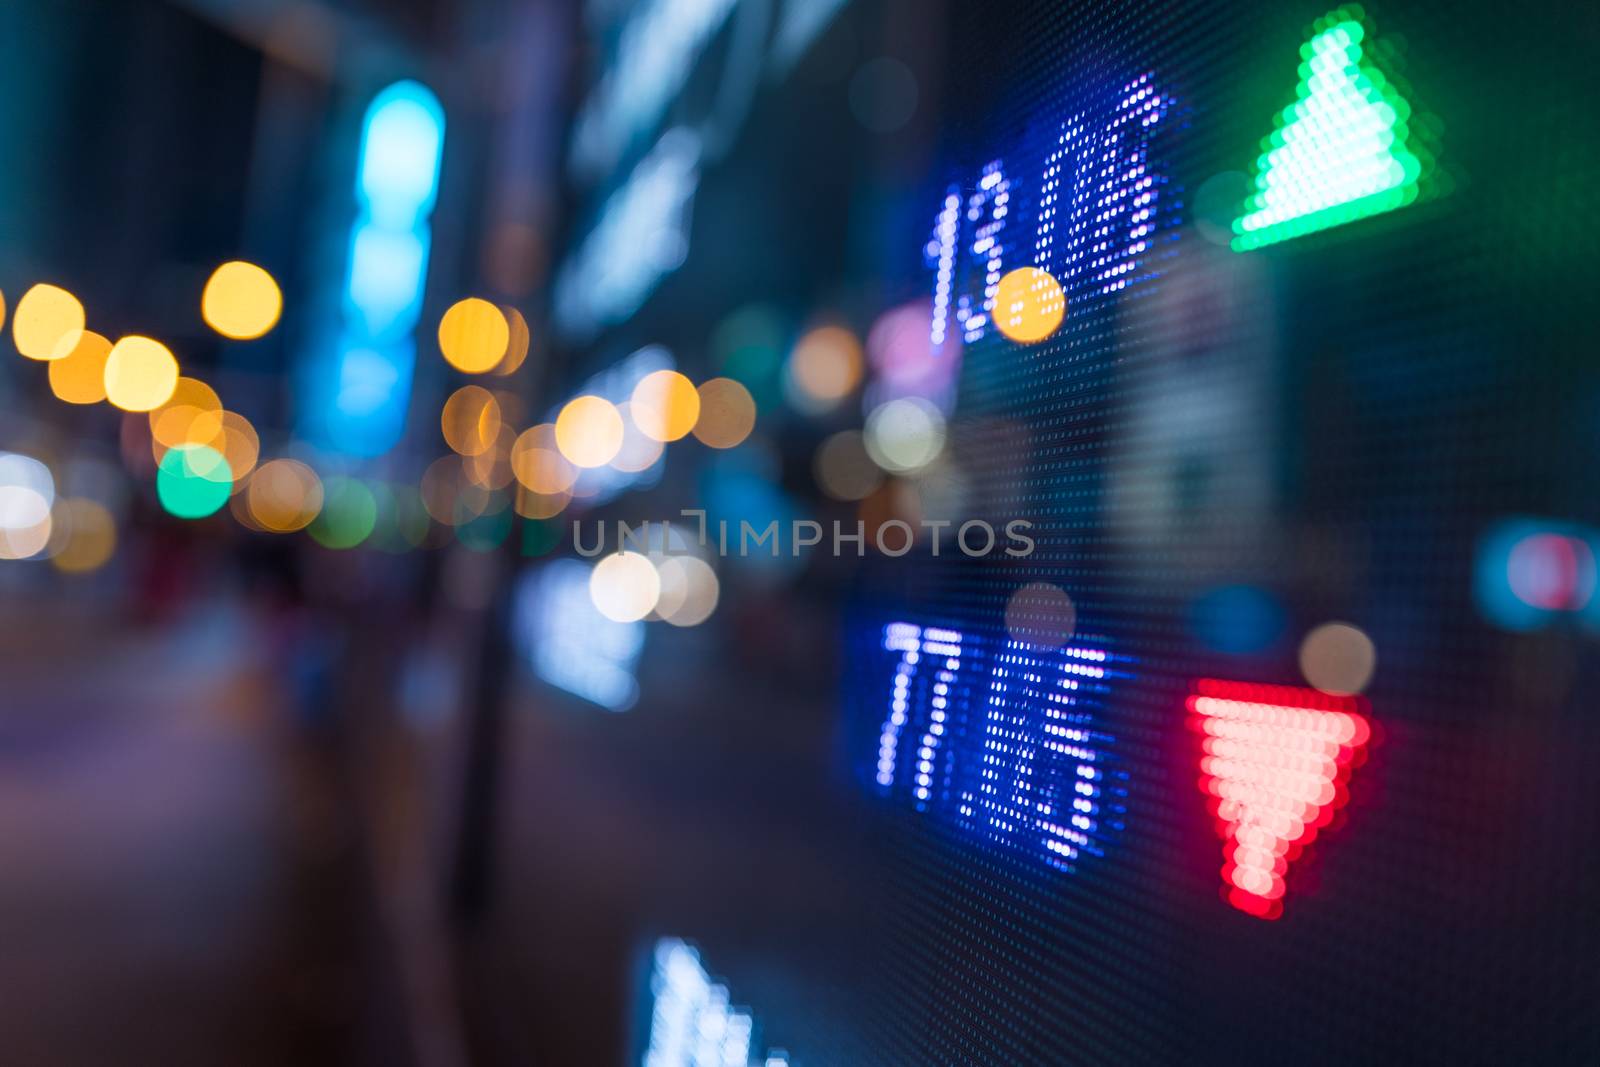 Display of Stock market quotes by leungchopan